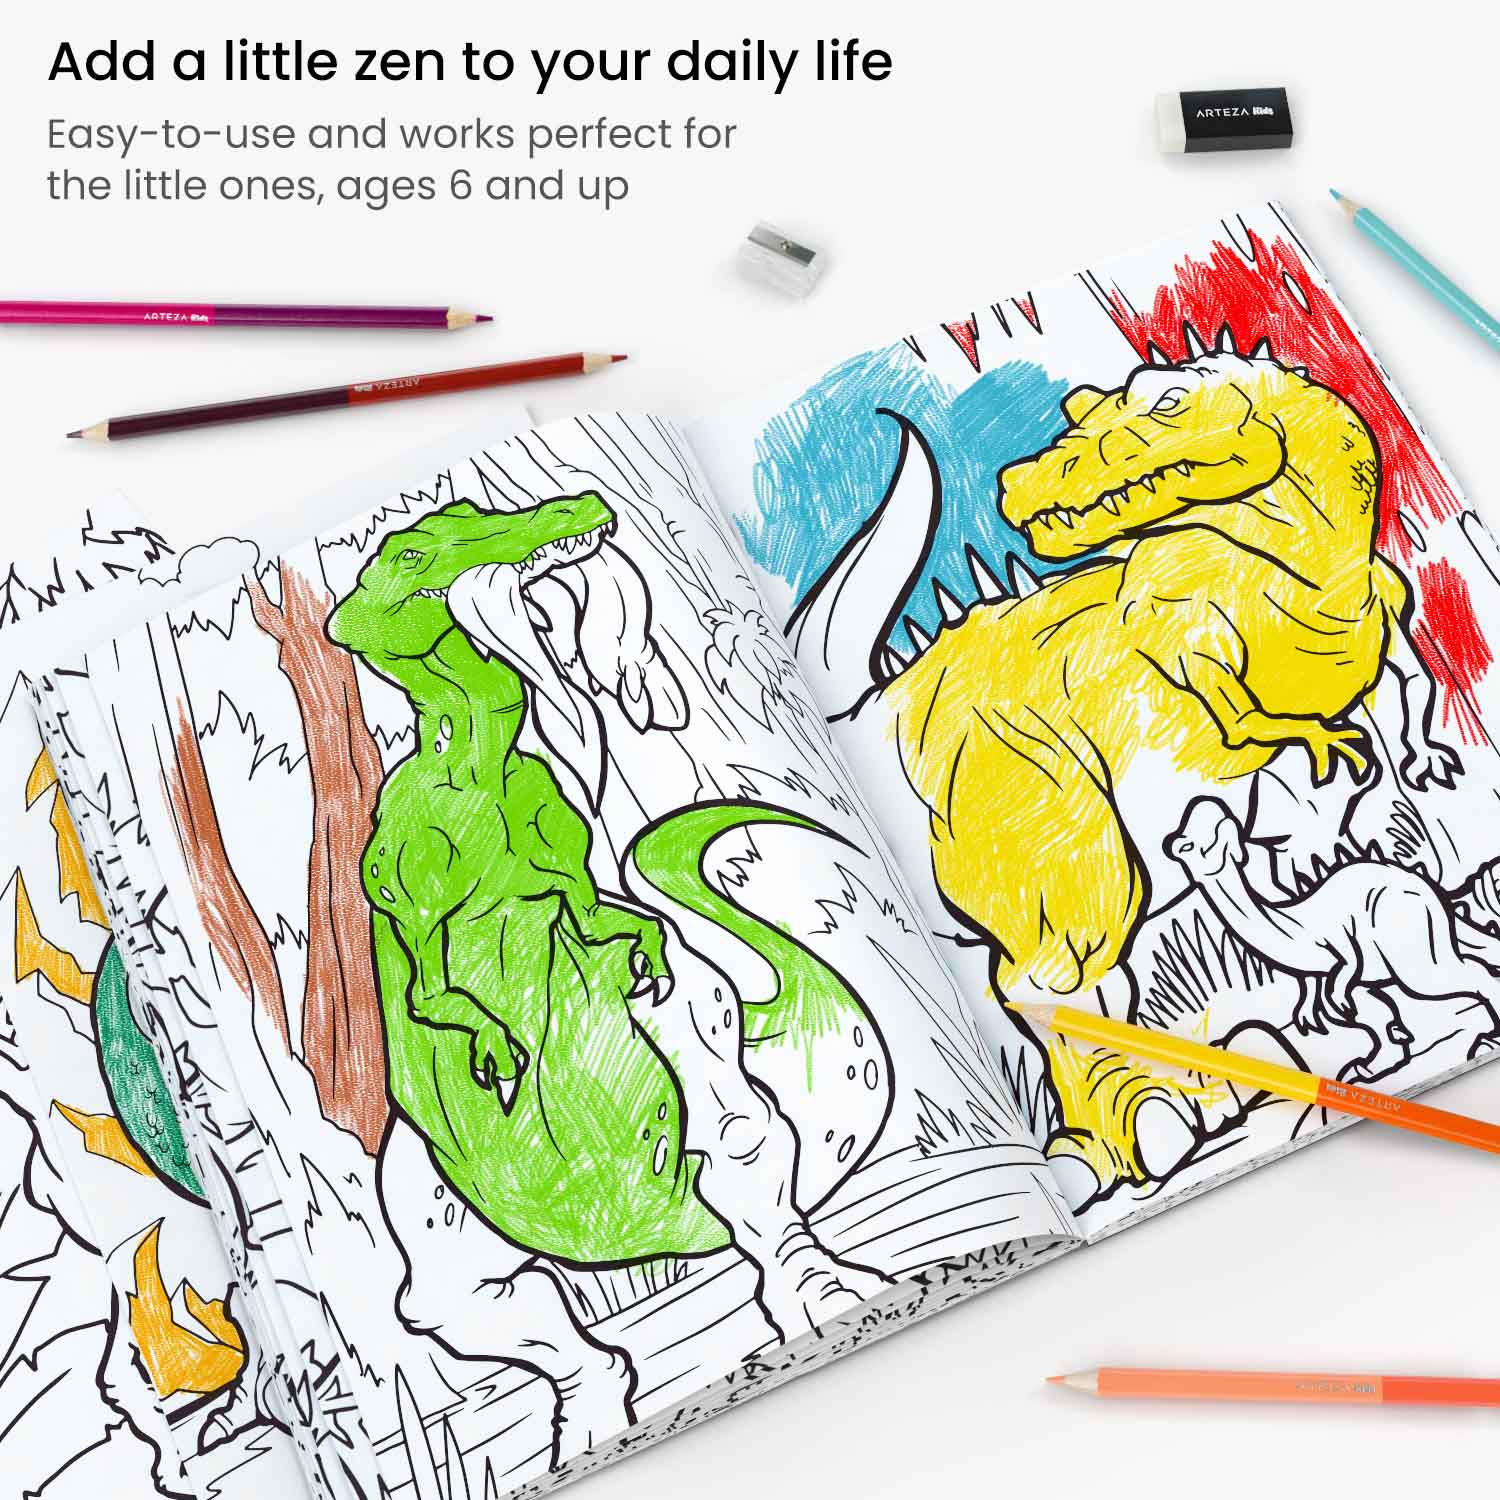 The Art Kit – Coloring pages and printables for kids